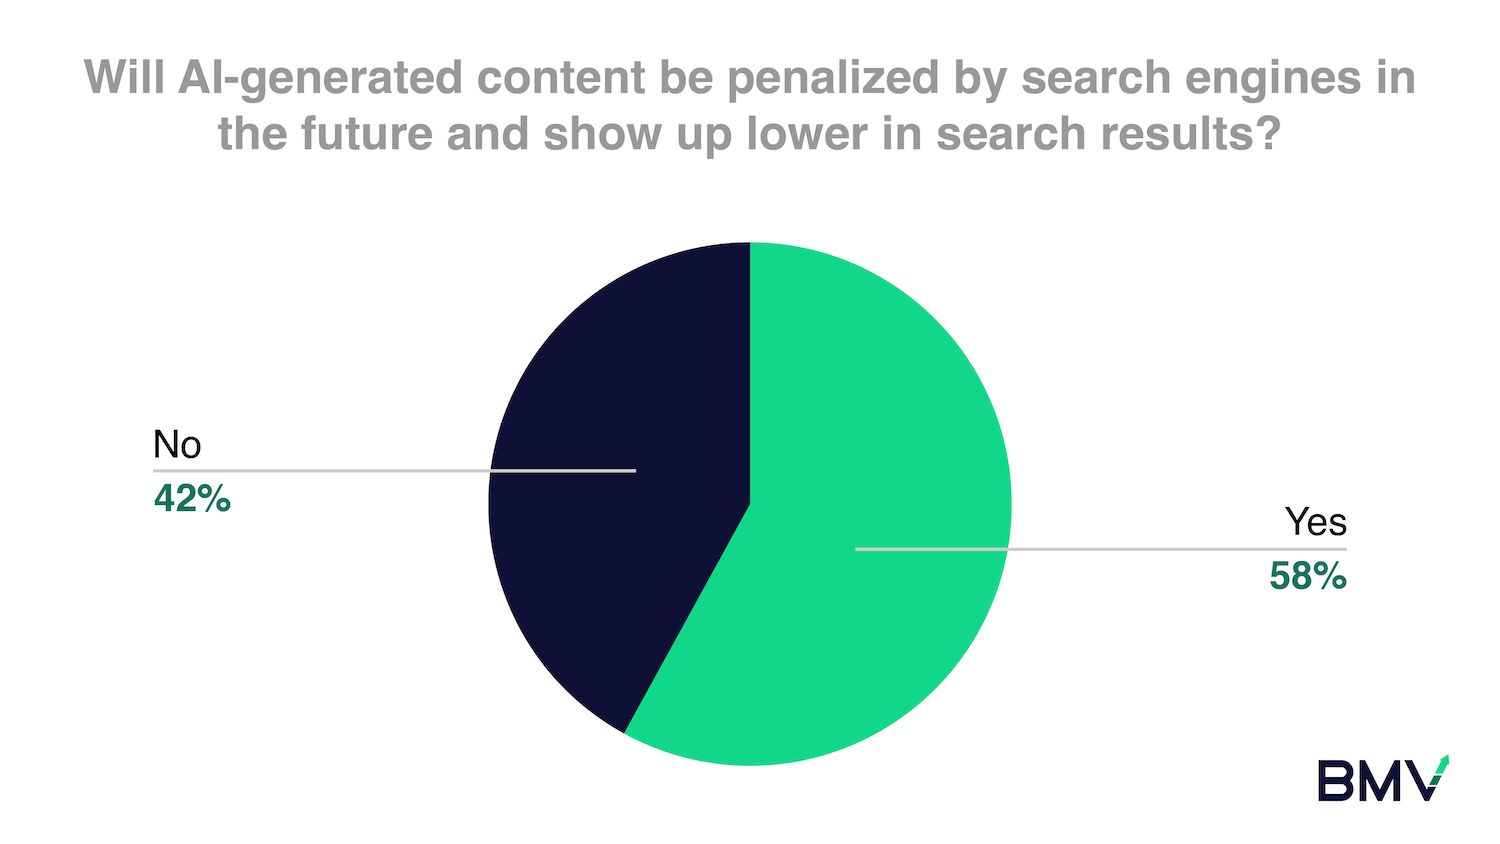 Chart: Will AI-generated content be penalized by search engines?